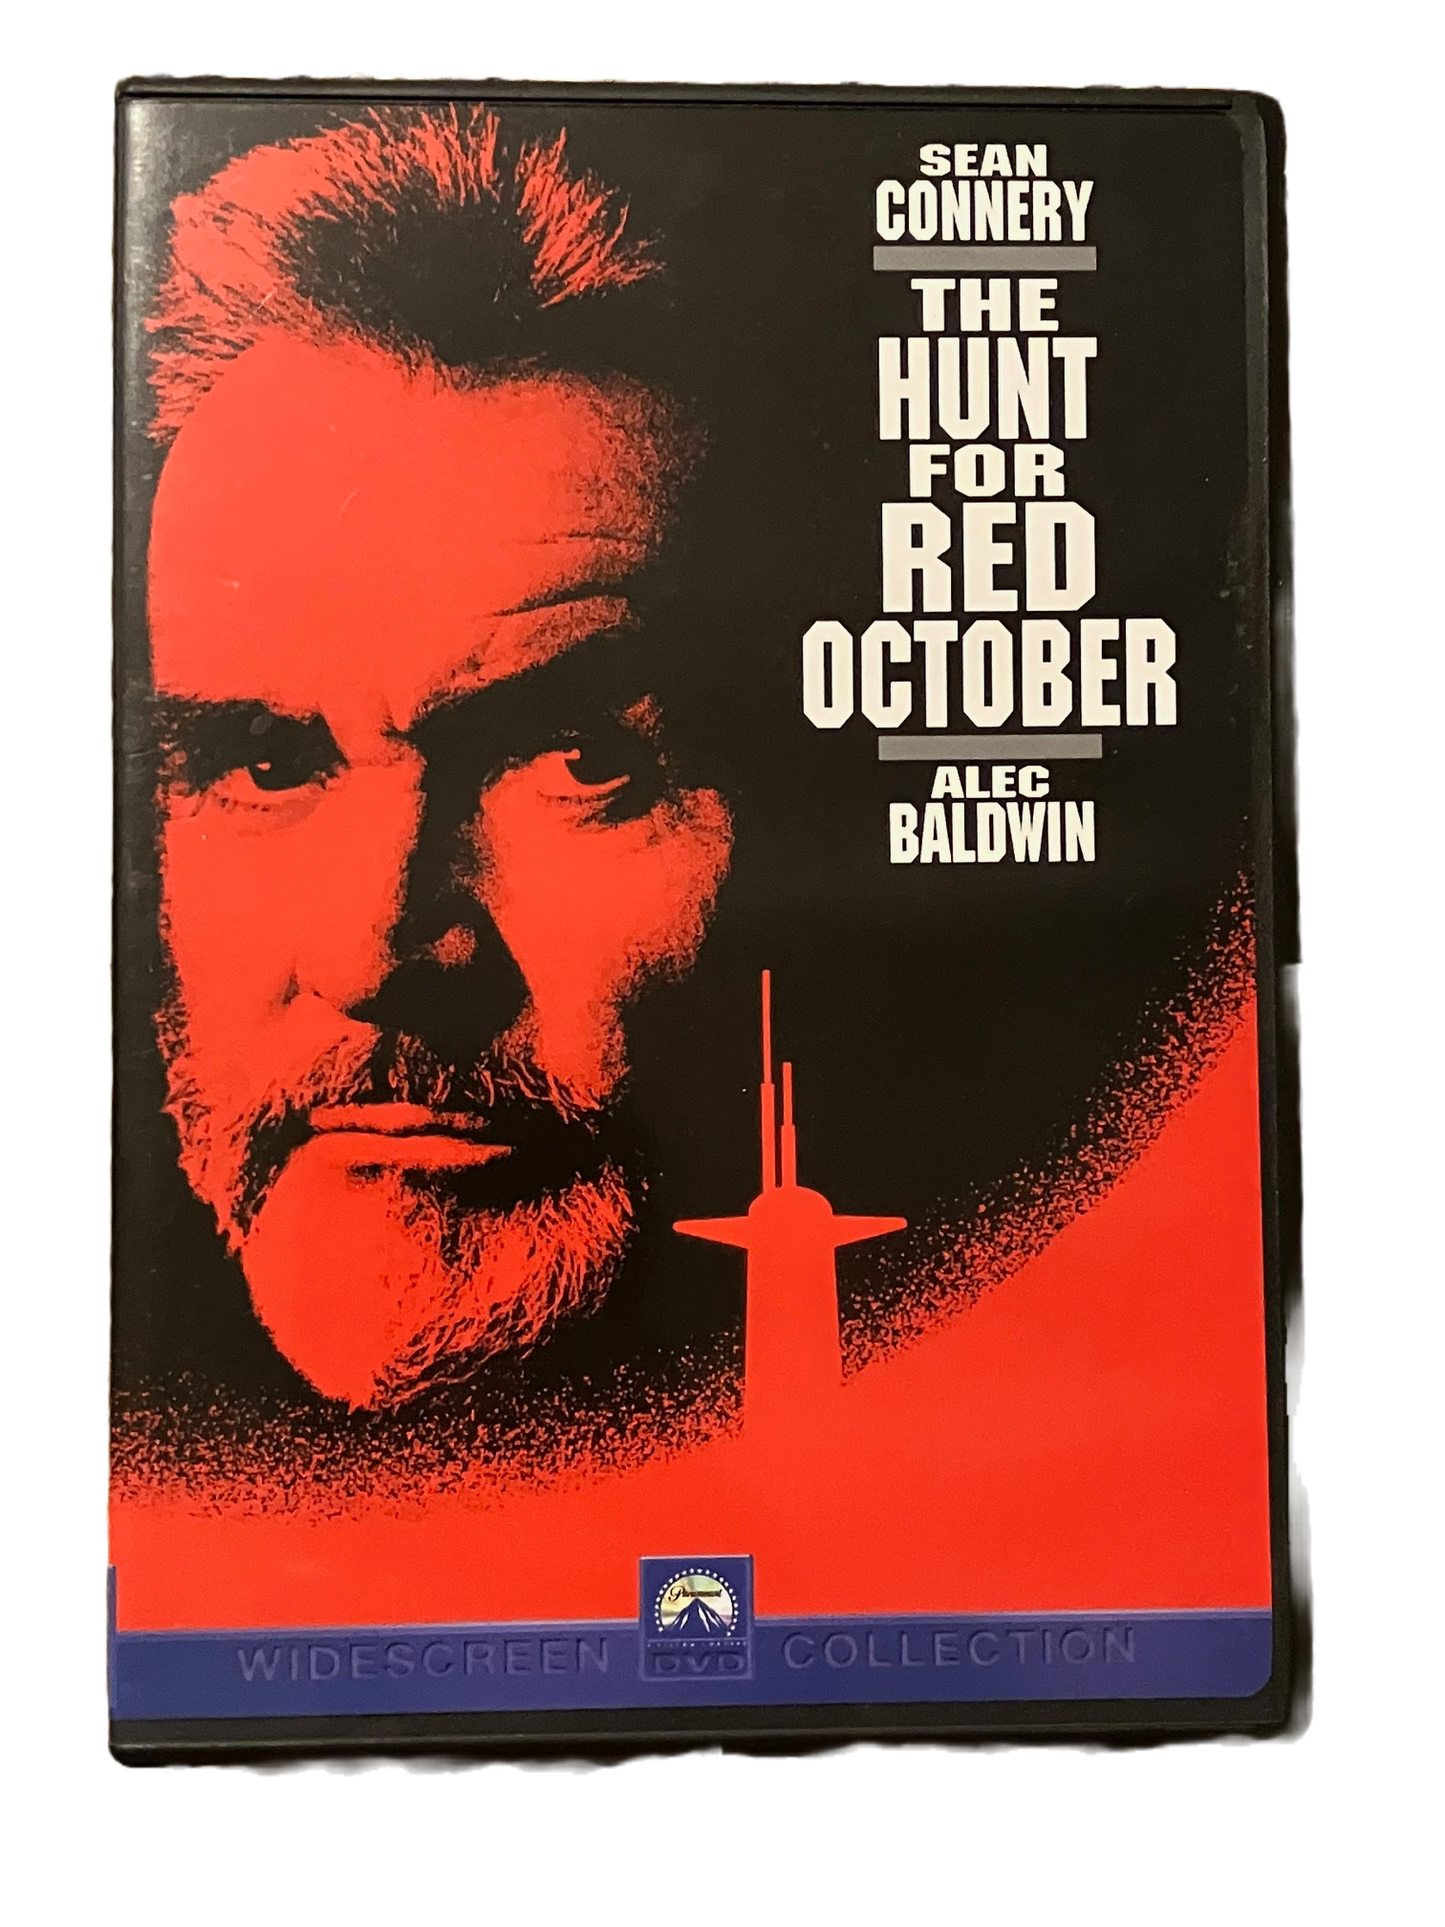 The Hunt For Red October Used DVD Movie. Sean Connery & Alec Baldwin